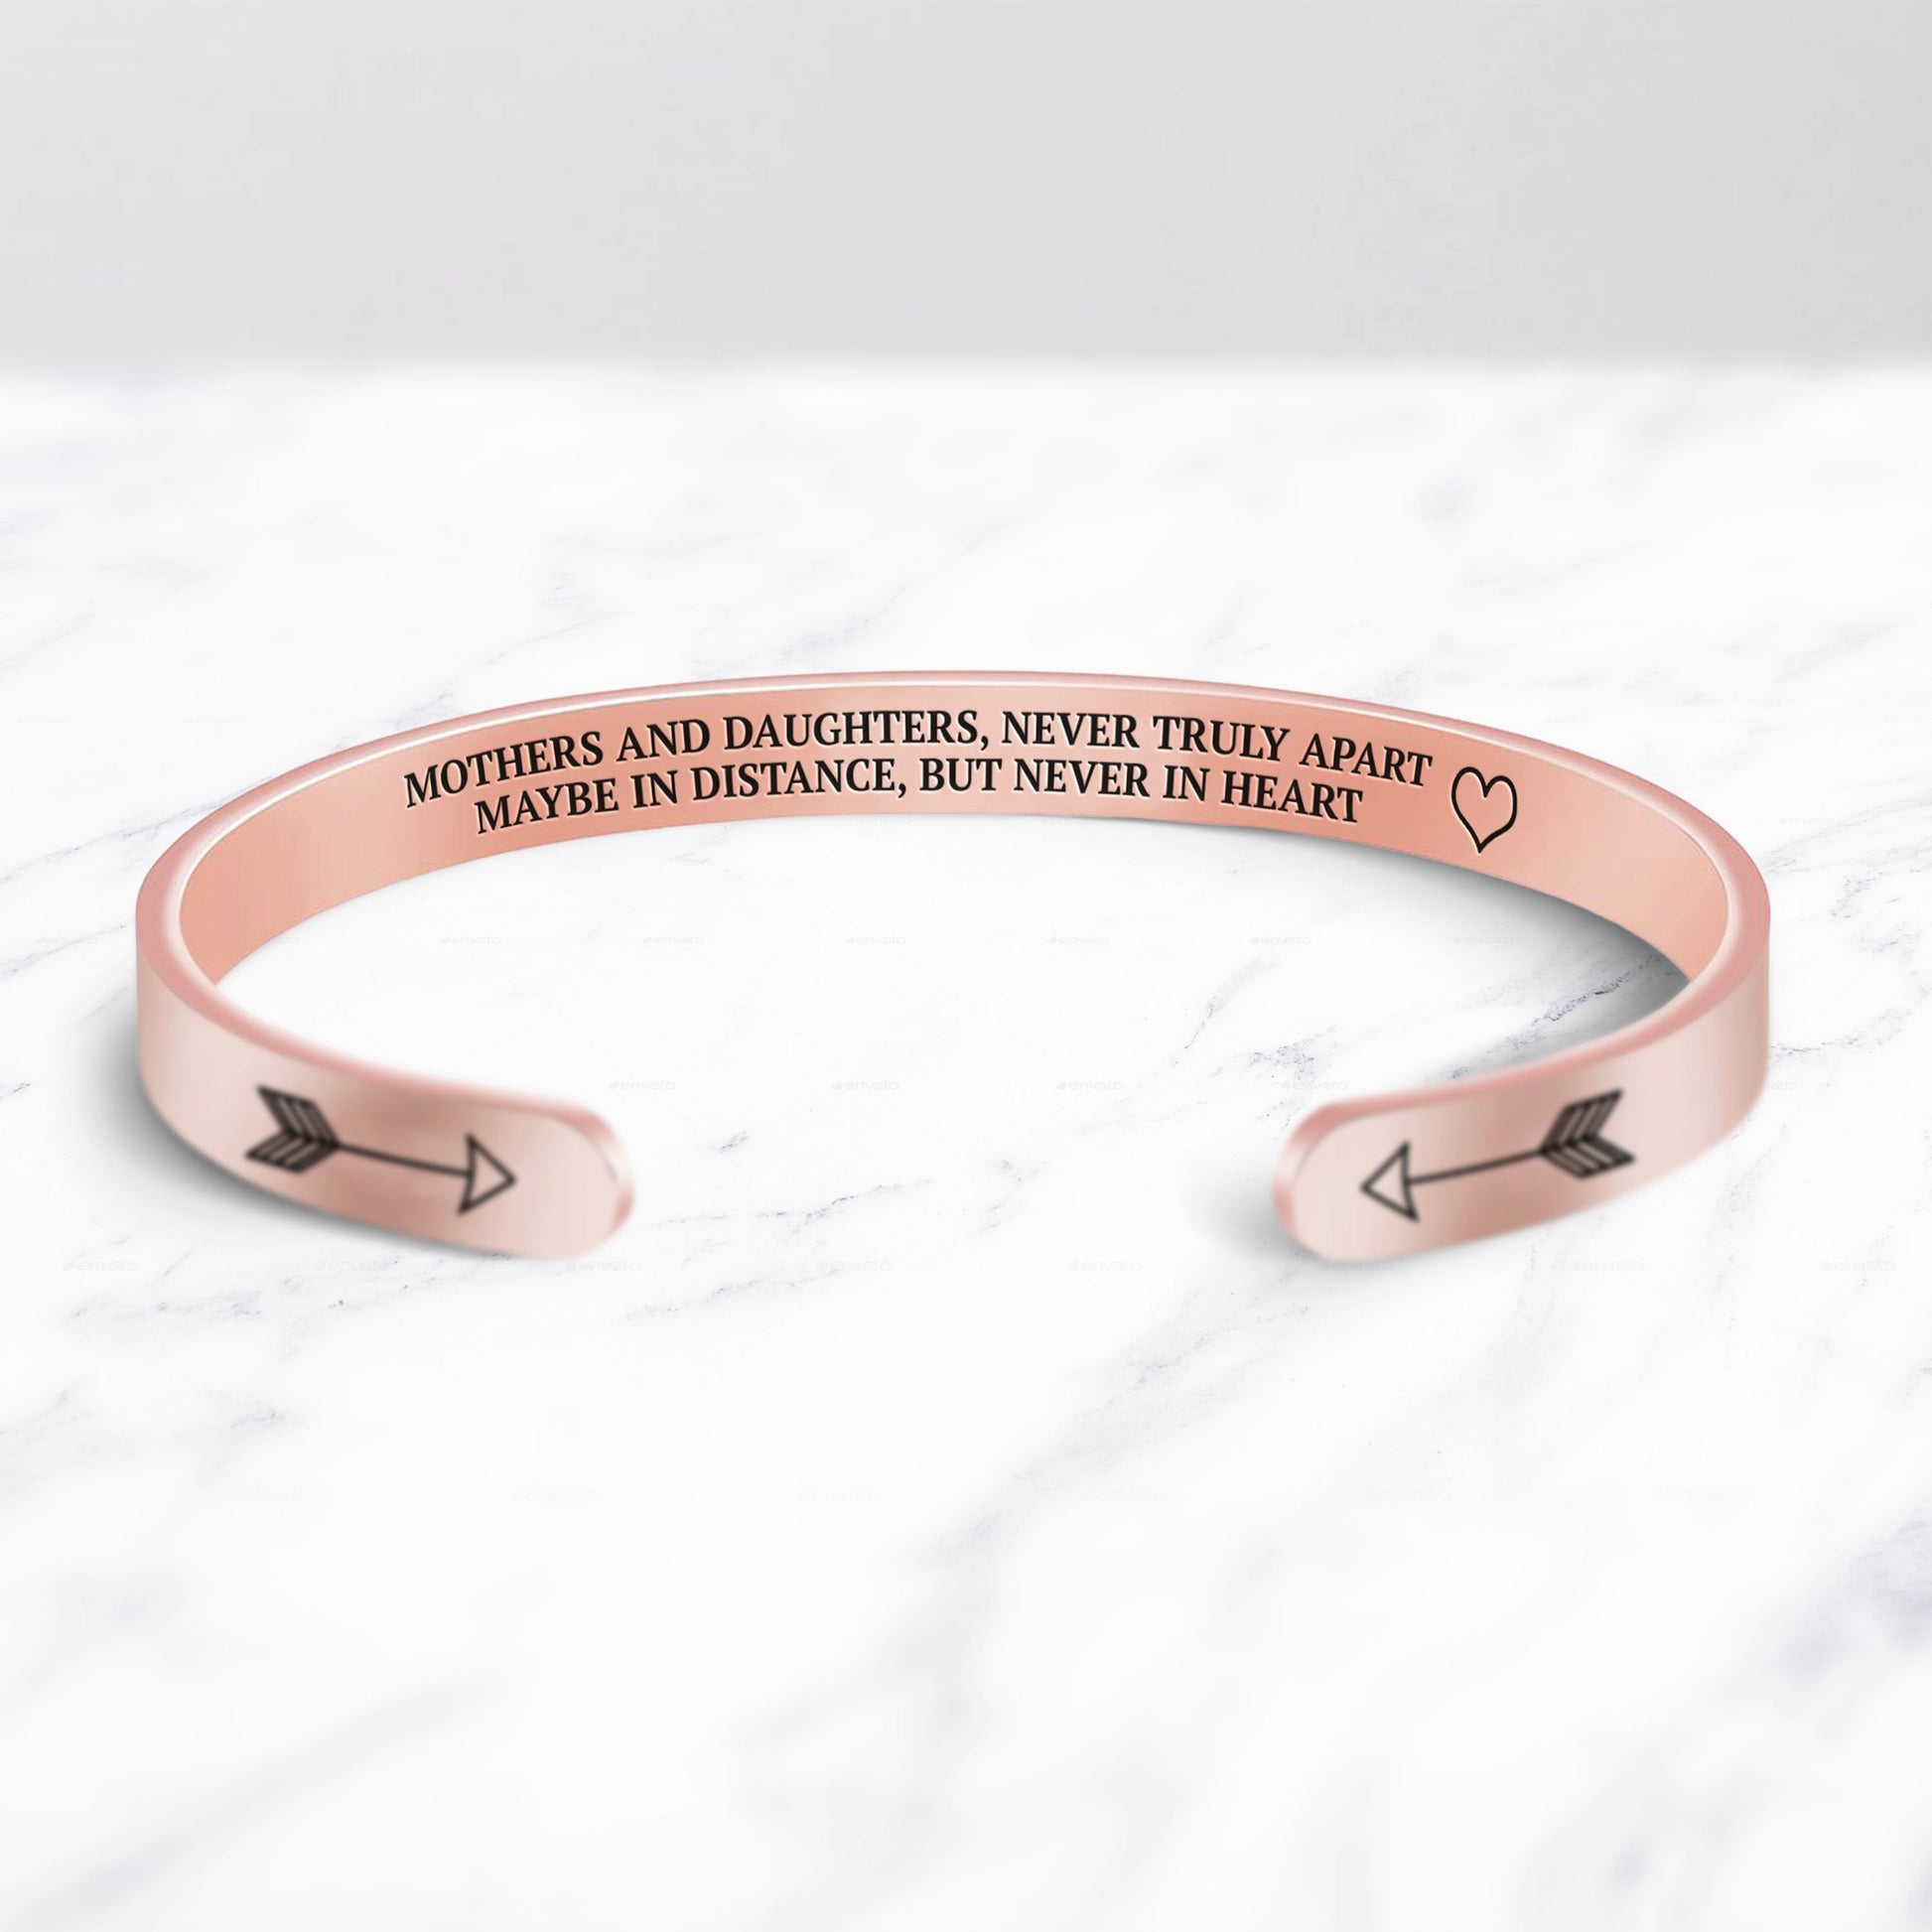 Mothers and Daughters Never Truly Part Cuff Bracelet bracelet with rose gold plating on a marble background